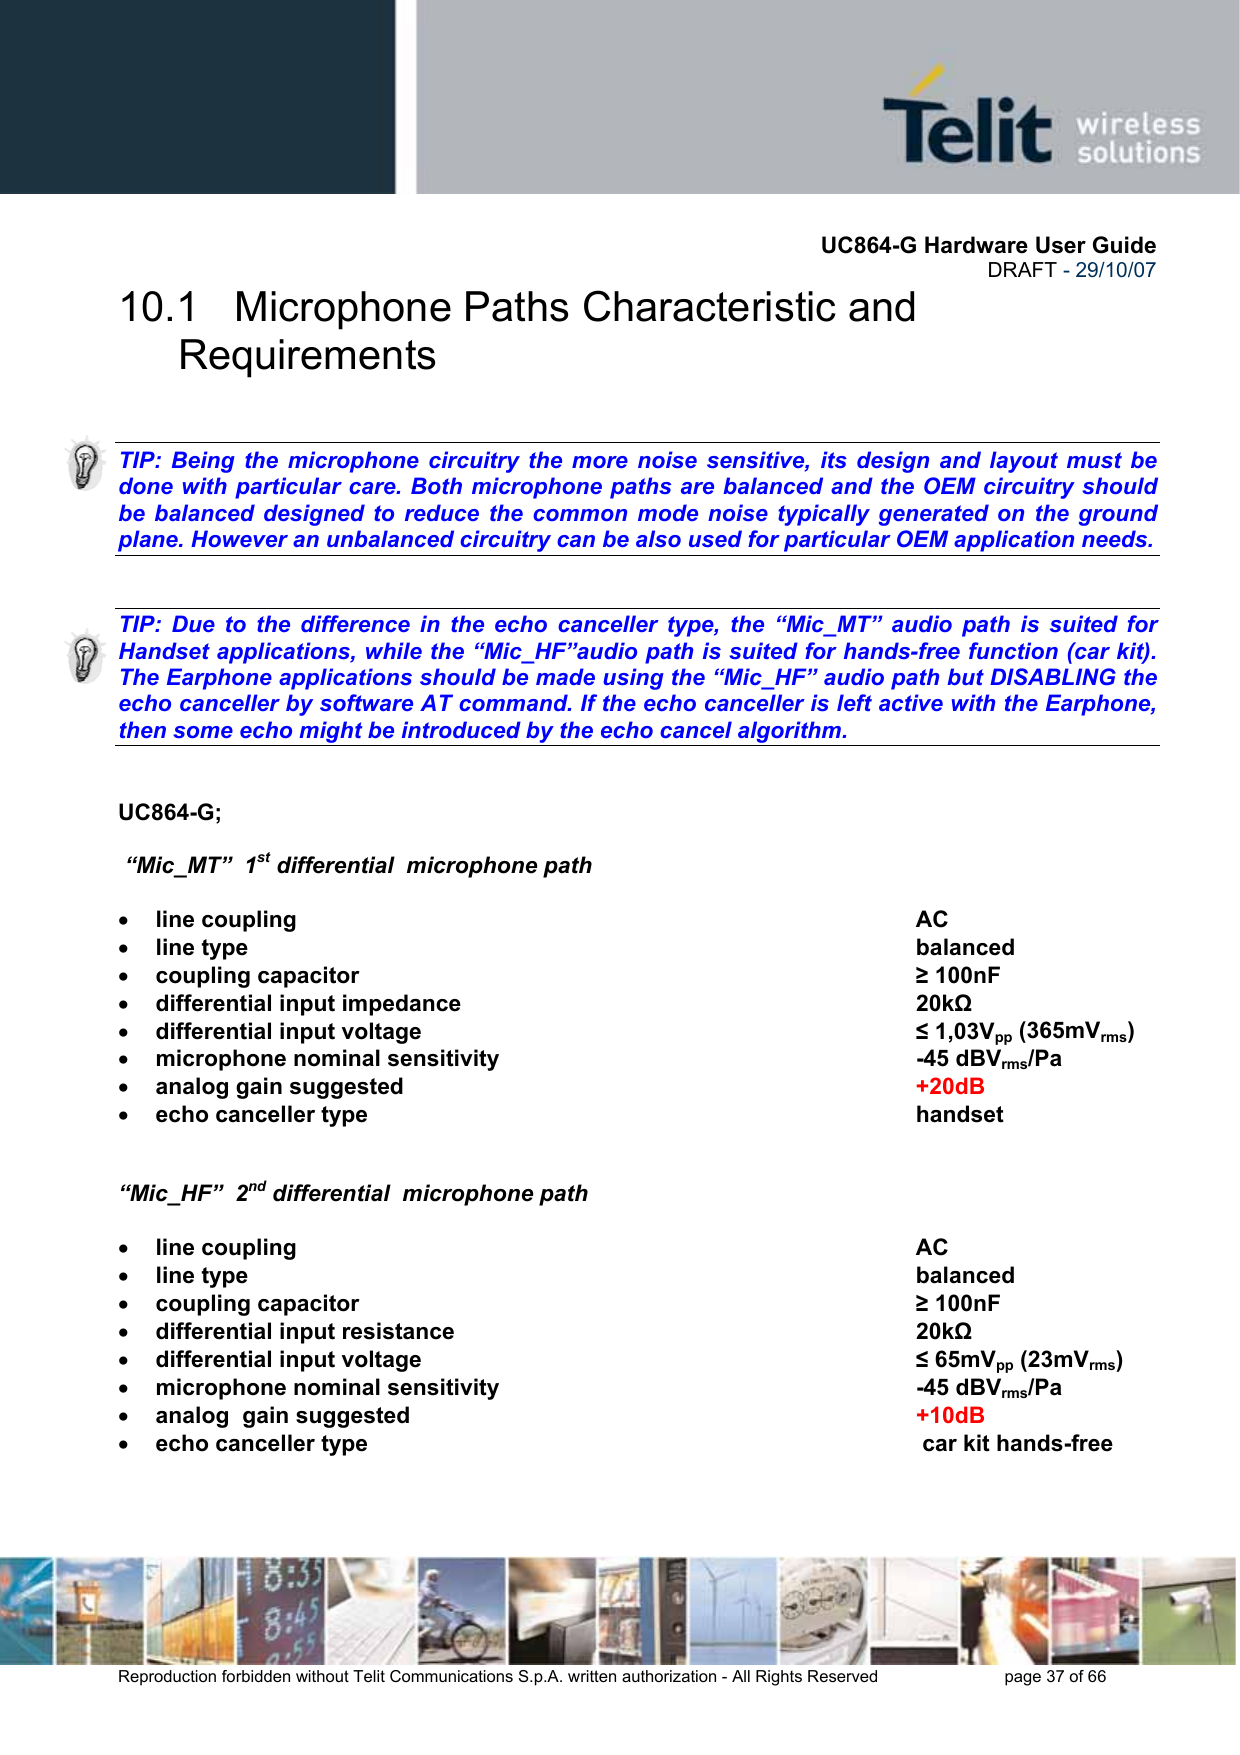       UC864-G Hardware User Guide  DRAFT - 29/10/07      Reproduction forbidden without Telit Communications S.p.A. written authorization - All Rights Reserved    page 37 of 66  10.1   Microphone Paths Characteristic and Requirements   TIP: Being the microphone circuitry the more noise sensitive, its design and layout must be done with particular care. Both microphone paths are balanced and the OEM circuitry should be balanced designed to reduce the common mode noise typically generated on the ground plane. However an unbalanced circuitry can be also used for particular OEM application needs.   TIP: Due to the difference in the echo canceller type, the “Mic_MT” audio path is suited for Handset applications, while the “Mic_HF”audio path is suited for hands-free function (car kit). The Earphone applications should be made using the “Mic_HF” audio path but DISABLING the echo canceller by software AT command. If the echo canceller is left active with the Earphone, then some echo might be introduced by the echo cancel algorithm.   UC864-G;   “Mic_MT”  1st differential  microphone path  • line coupling       AC  • line type        balanced  • coupling capacitor        ≥ 100nF • differential input impedance      20kΩ  • differential input voltage              ≤ 1,03Vpp (365mVrms) • microphone nominal sensitivity     -45 dBVrms/Pa    • analog gain suggested      +20dB • echo canceller type       handset         “Mic_HF”  2nd differential  microphone path  • line coupling       AC • line type        balanced • coupling capacitor        ≥ 100nF • differential input resistance      20kΩ • differential input voltage              ≤ 65mVpp (23mVrms) • microphone nominal sensitivity            -45 dBVrms/Pa  • analog  gain suggested       +10dB • echo canceller type         car kit hands-free    